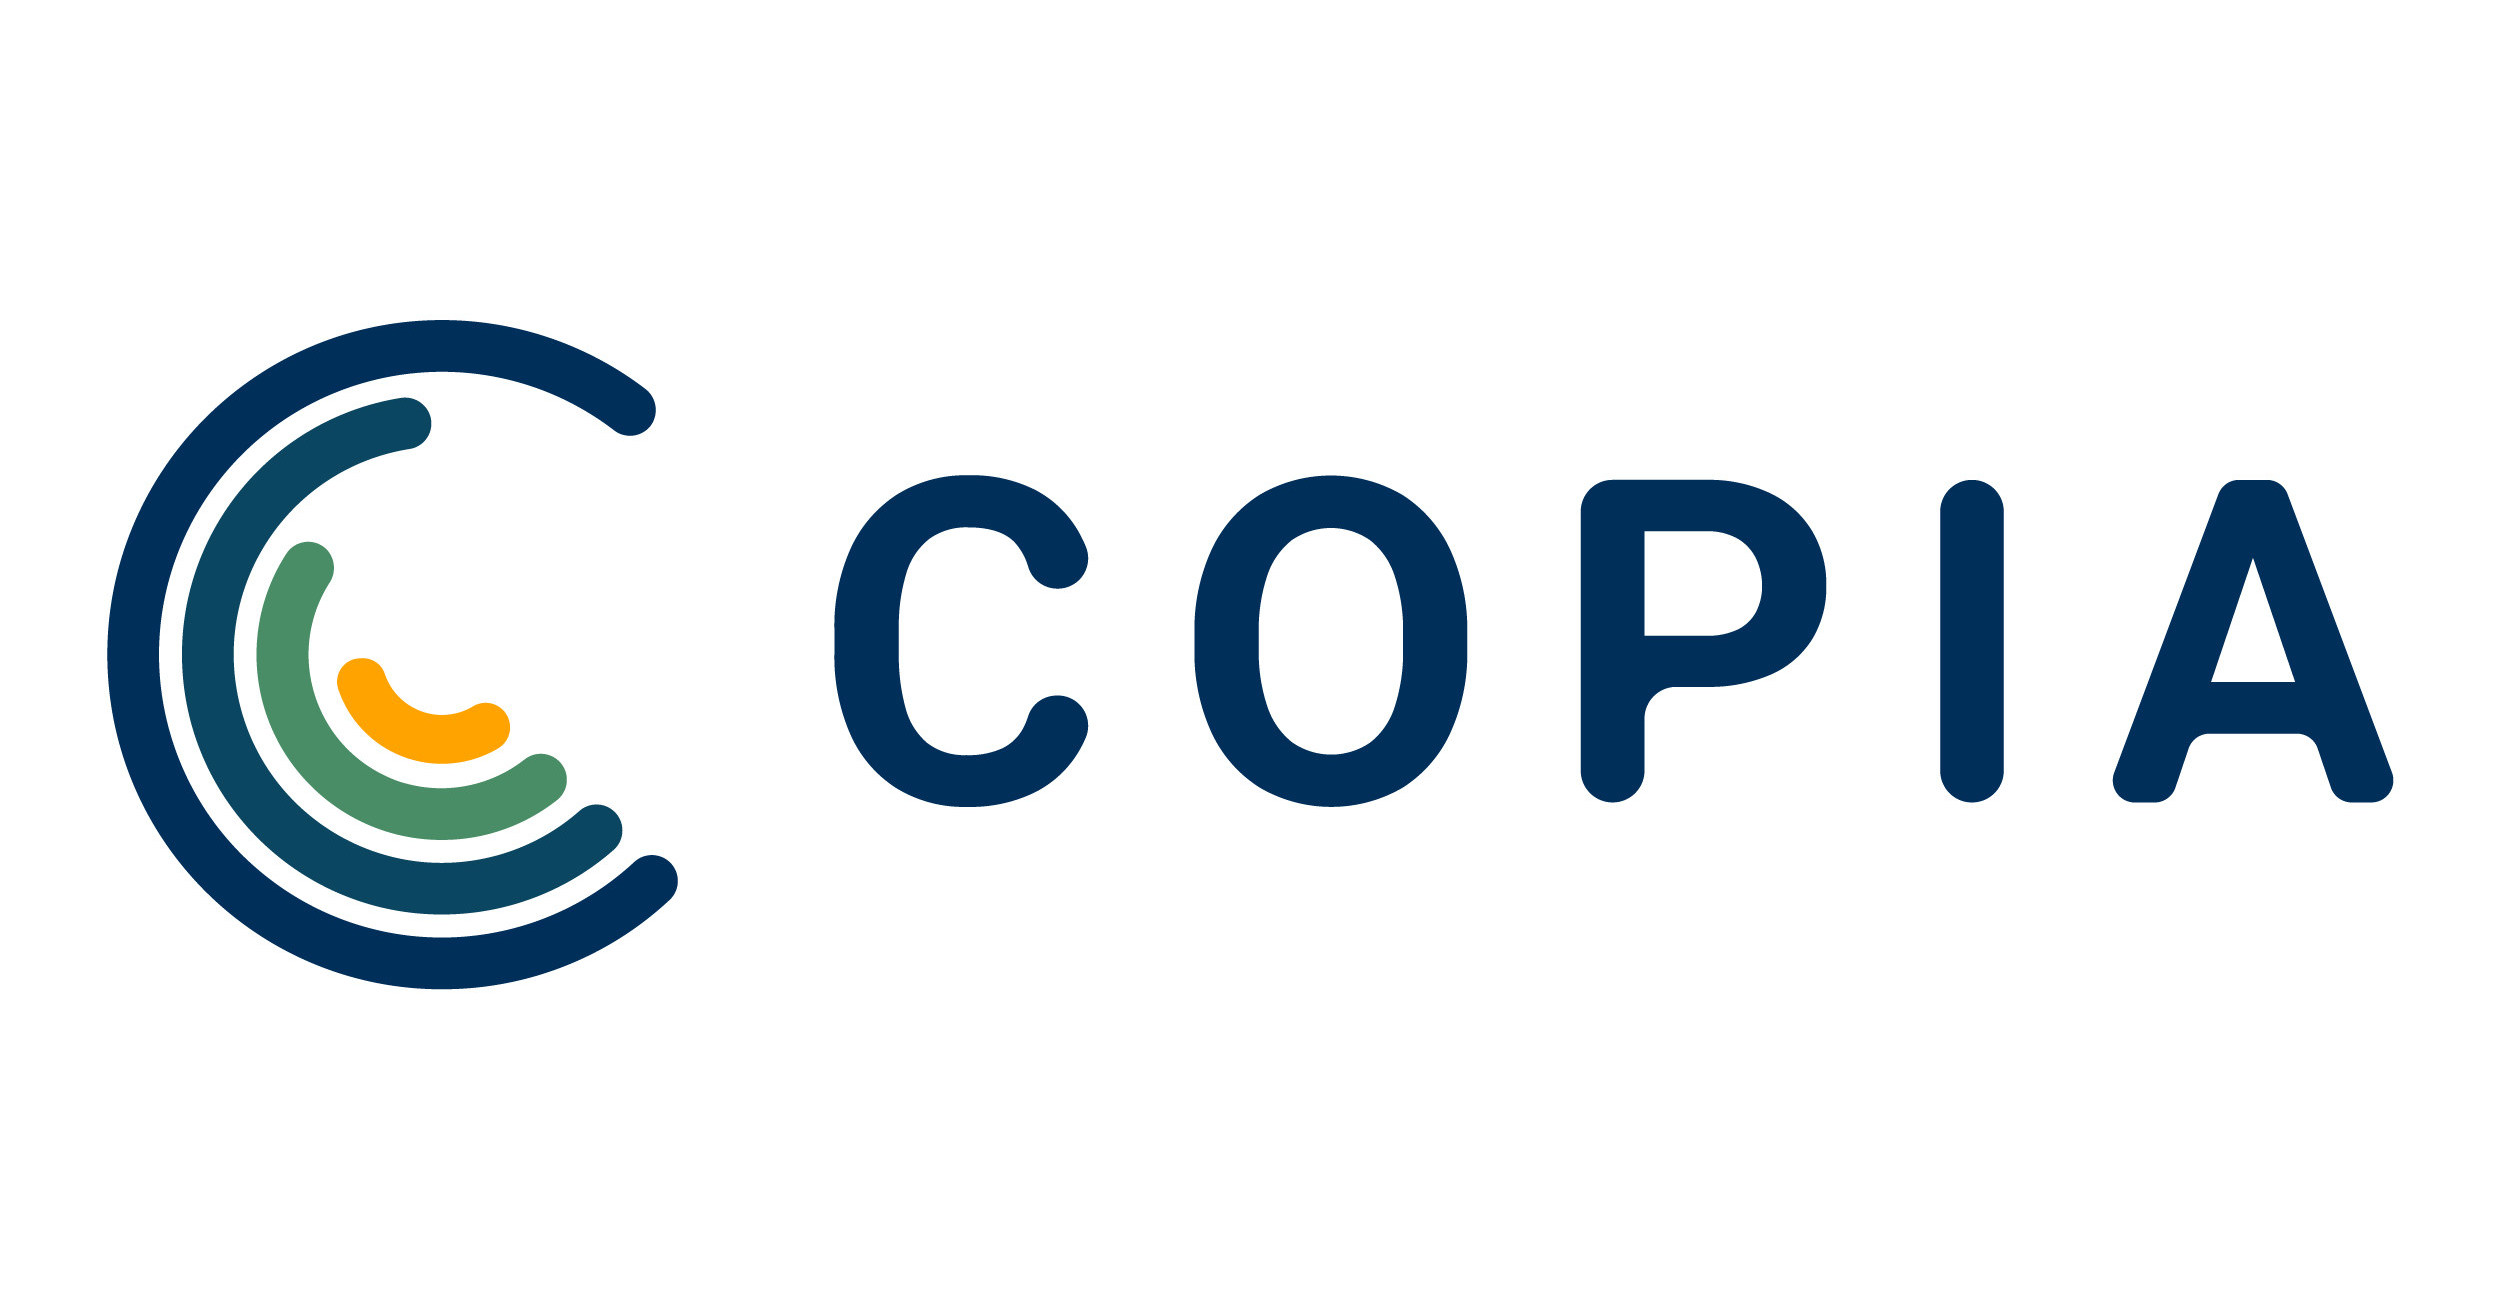 Veteran Financial Services Executives Shundrawn Thomas and Anthony Hoye Launch Private Investing Firm The Copia Group